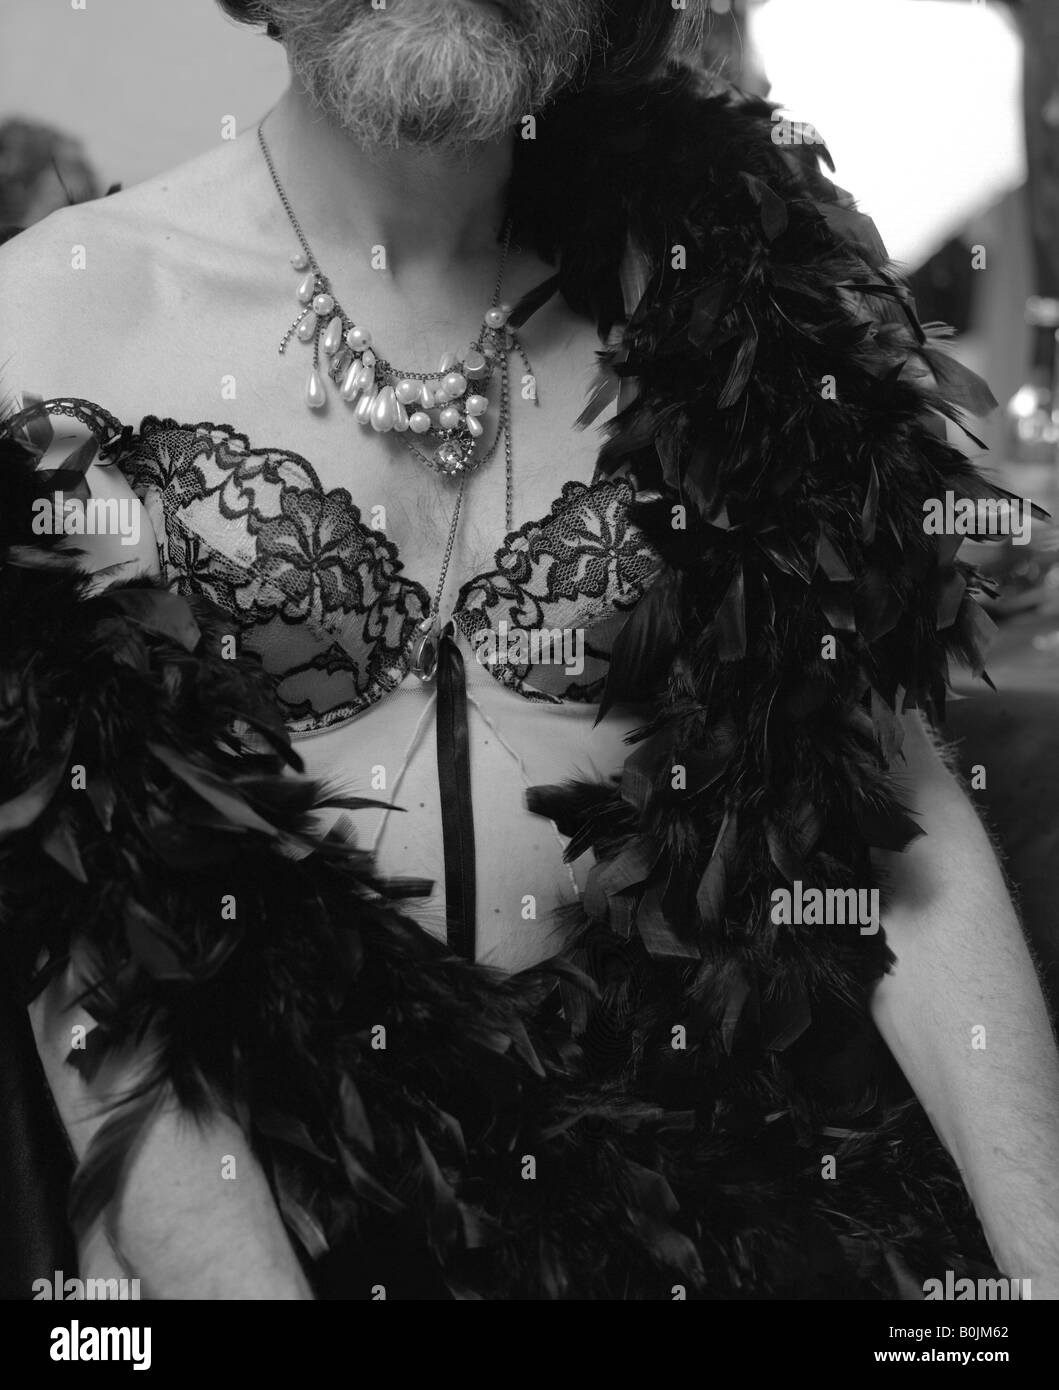 Cross Dressed Man Wearing Lingerie Pearl Necklace And A Feather